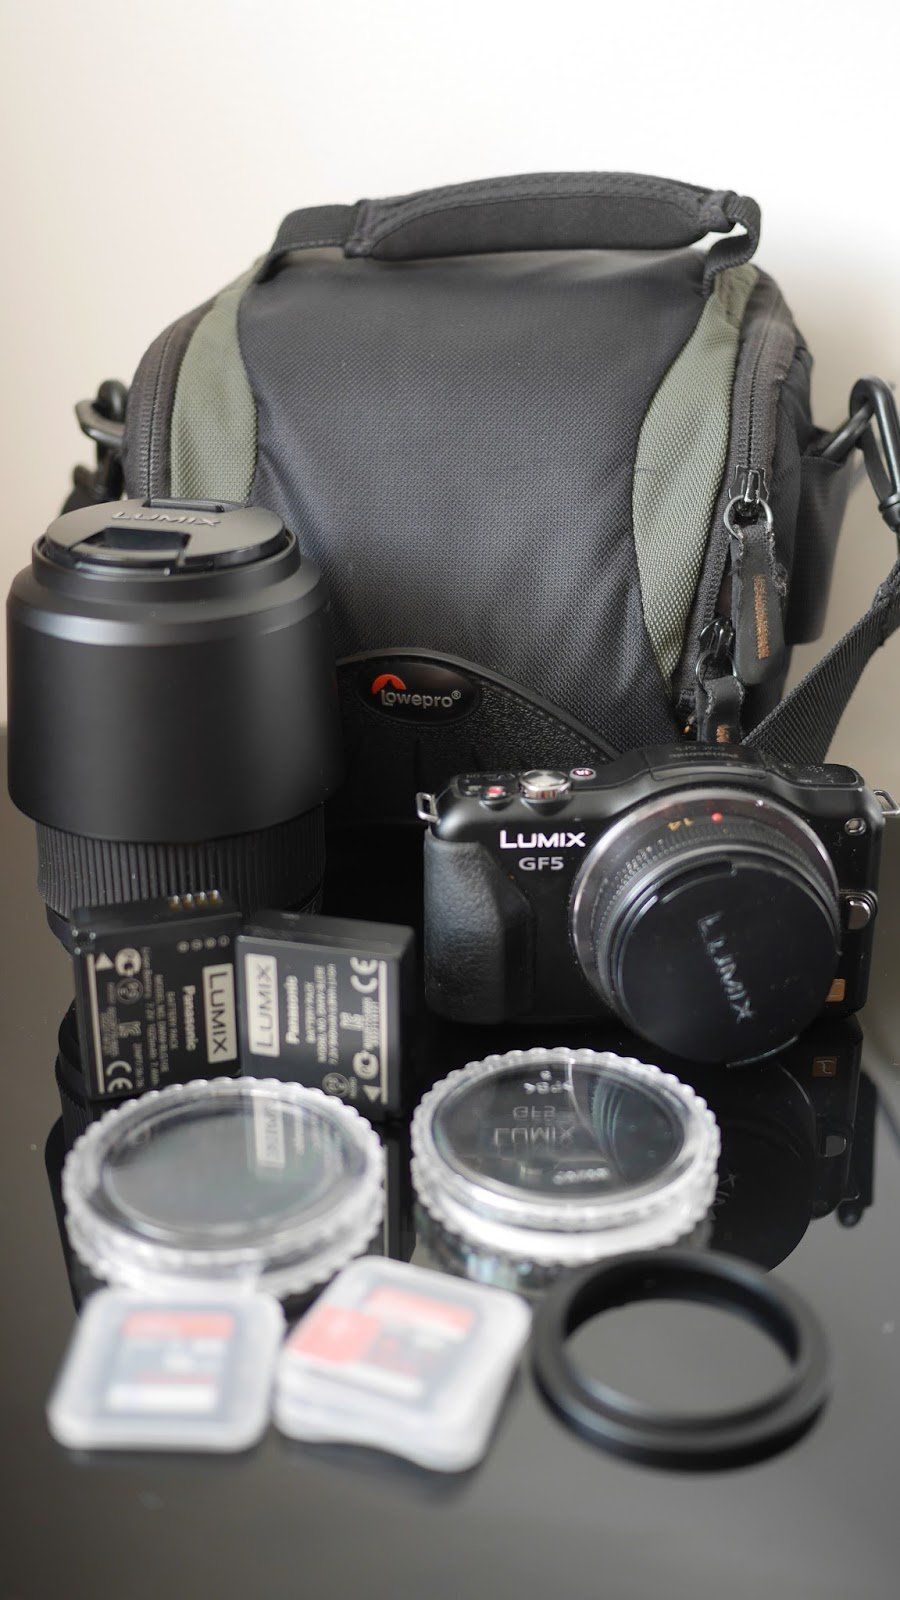 Lowepro Lightweight day bag, camera and lens kit